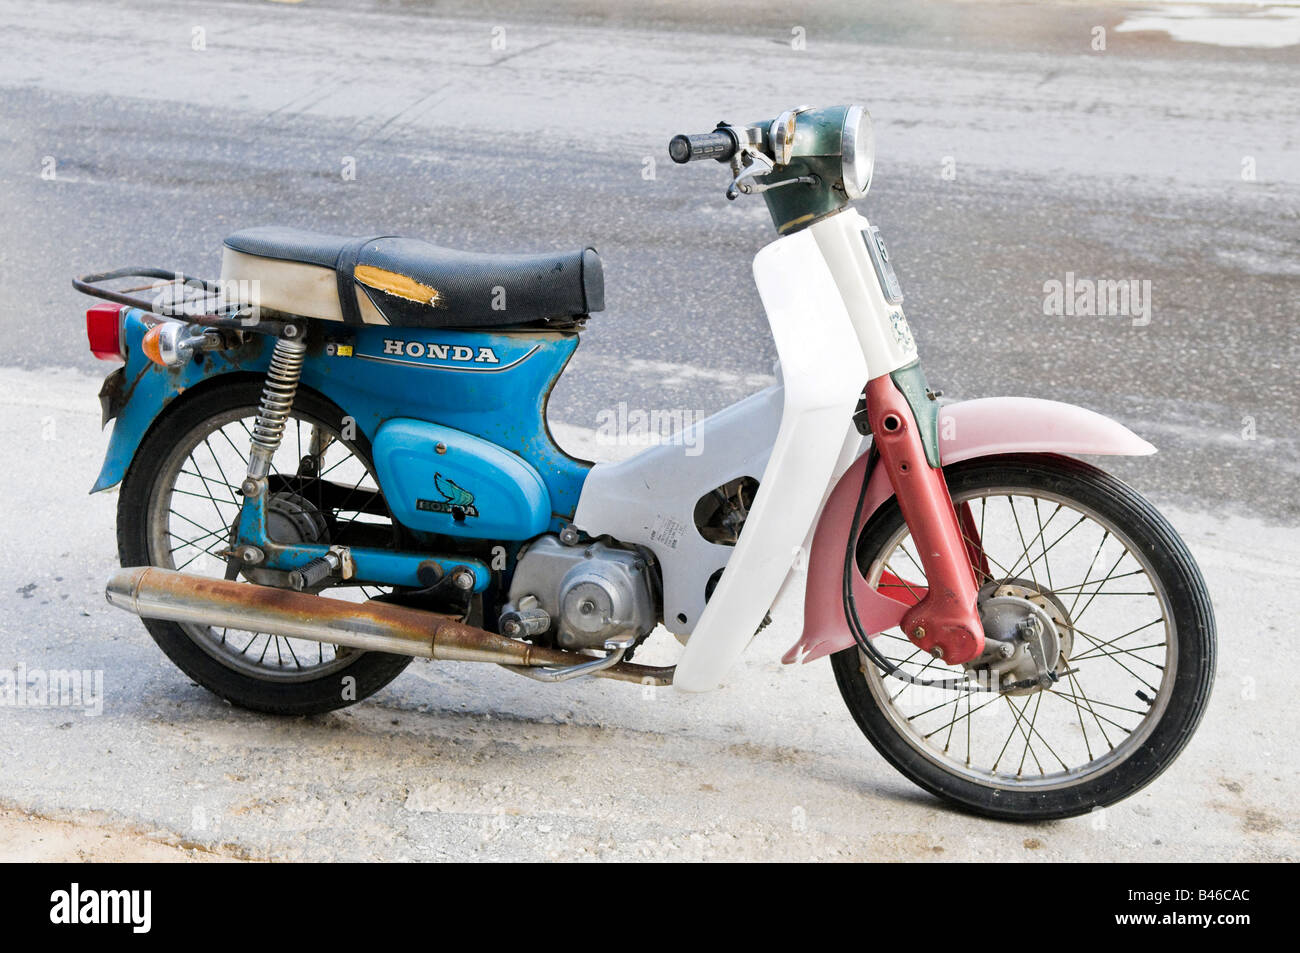 An Old Honda Scooter Stock Photo Alamy